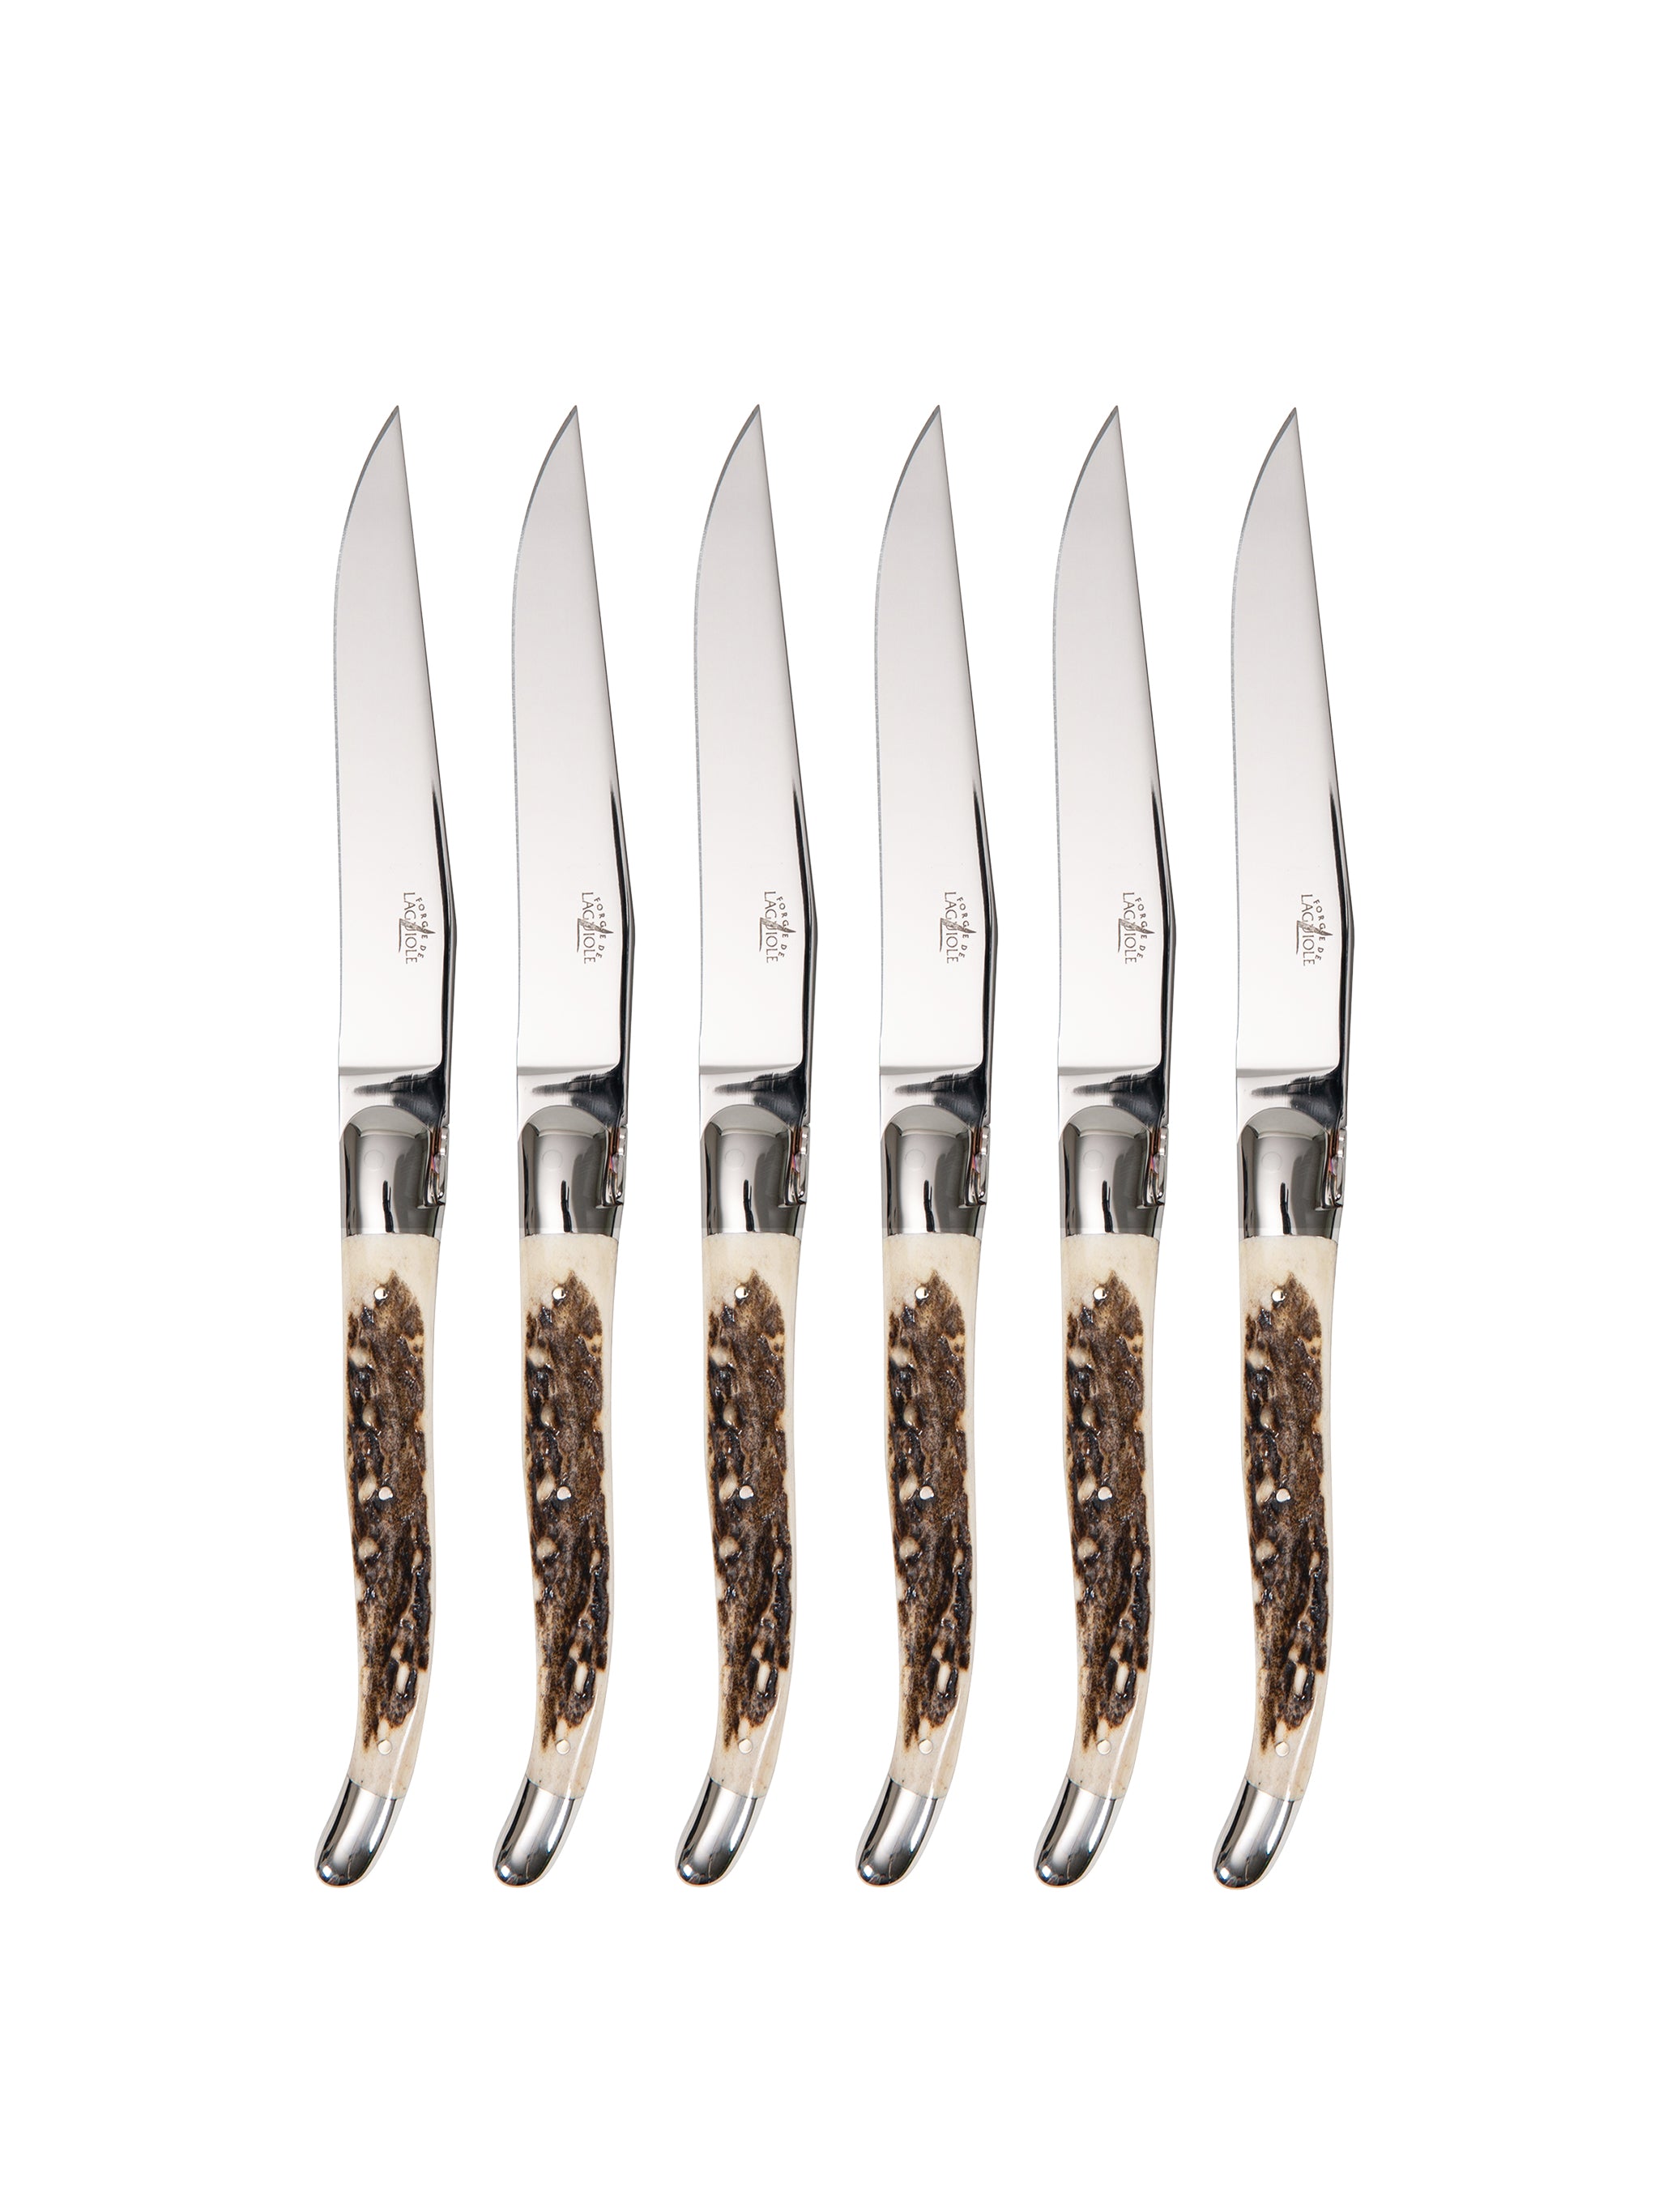 Forge de Laguiole Silver Stainless Steel Elk Stag Handle 2 Piece Steak Knife Set | Horn/Metal | Kathy Kuo Home